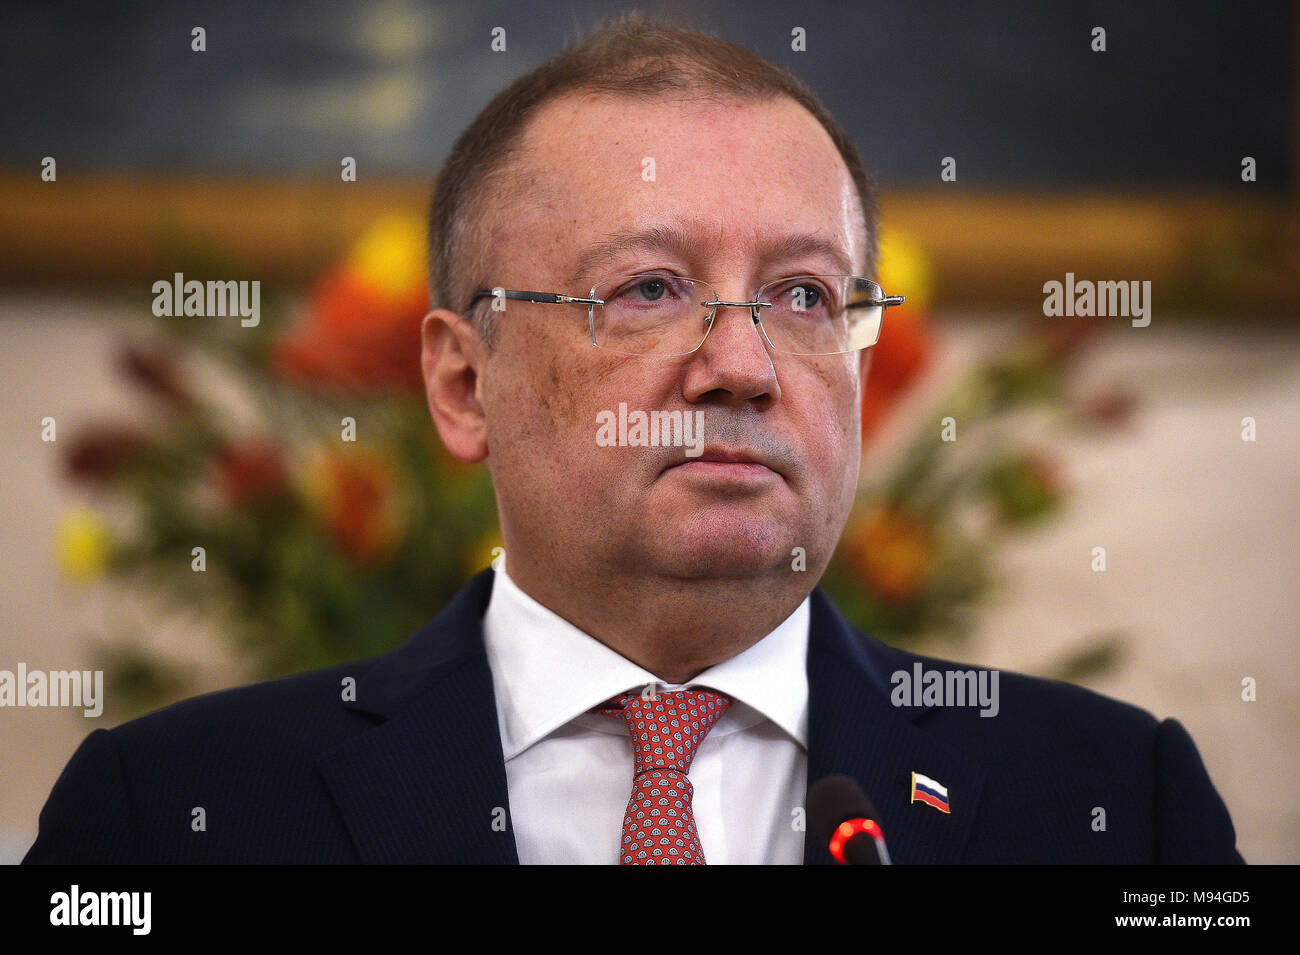 Russian ambassador Alexander Vladimirovich Yakovenko speaking at a news conference at his country's embassy in London in the aftermath of the Salisbury nerve agent attack on Russian double agent Sergei Skripal and his daughter Yulia. Stock Photo